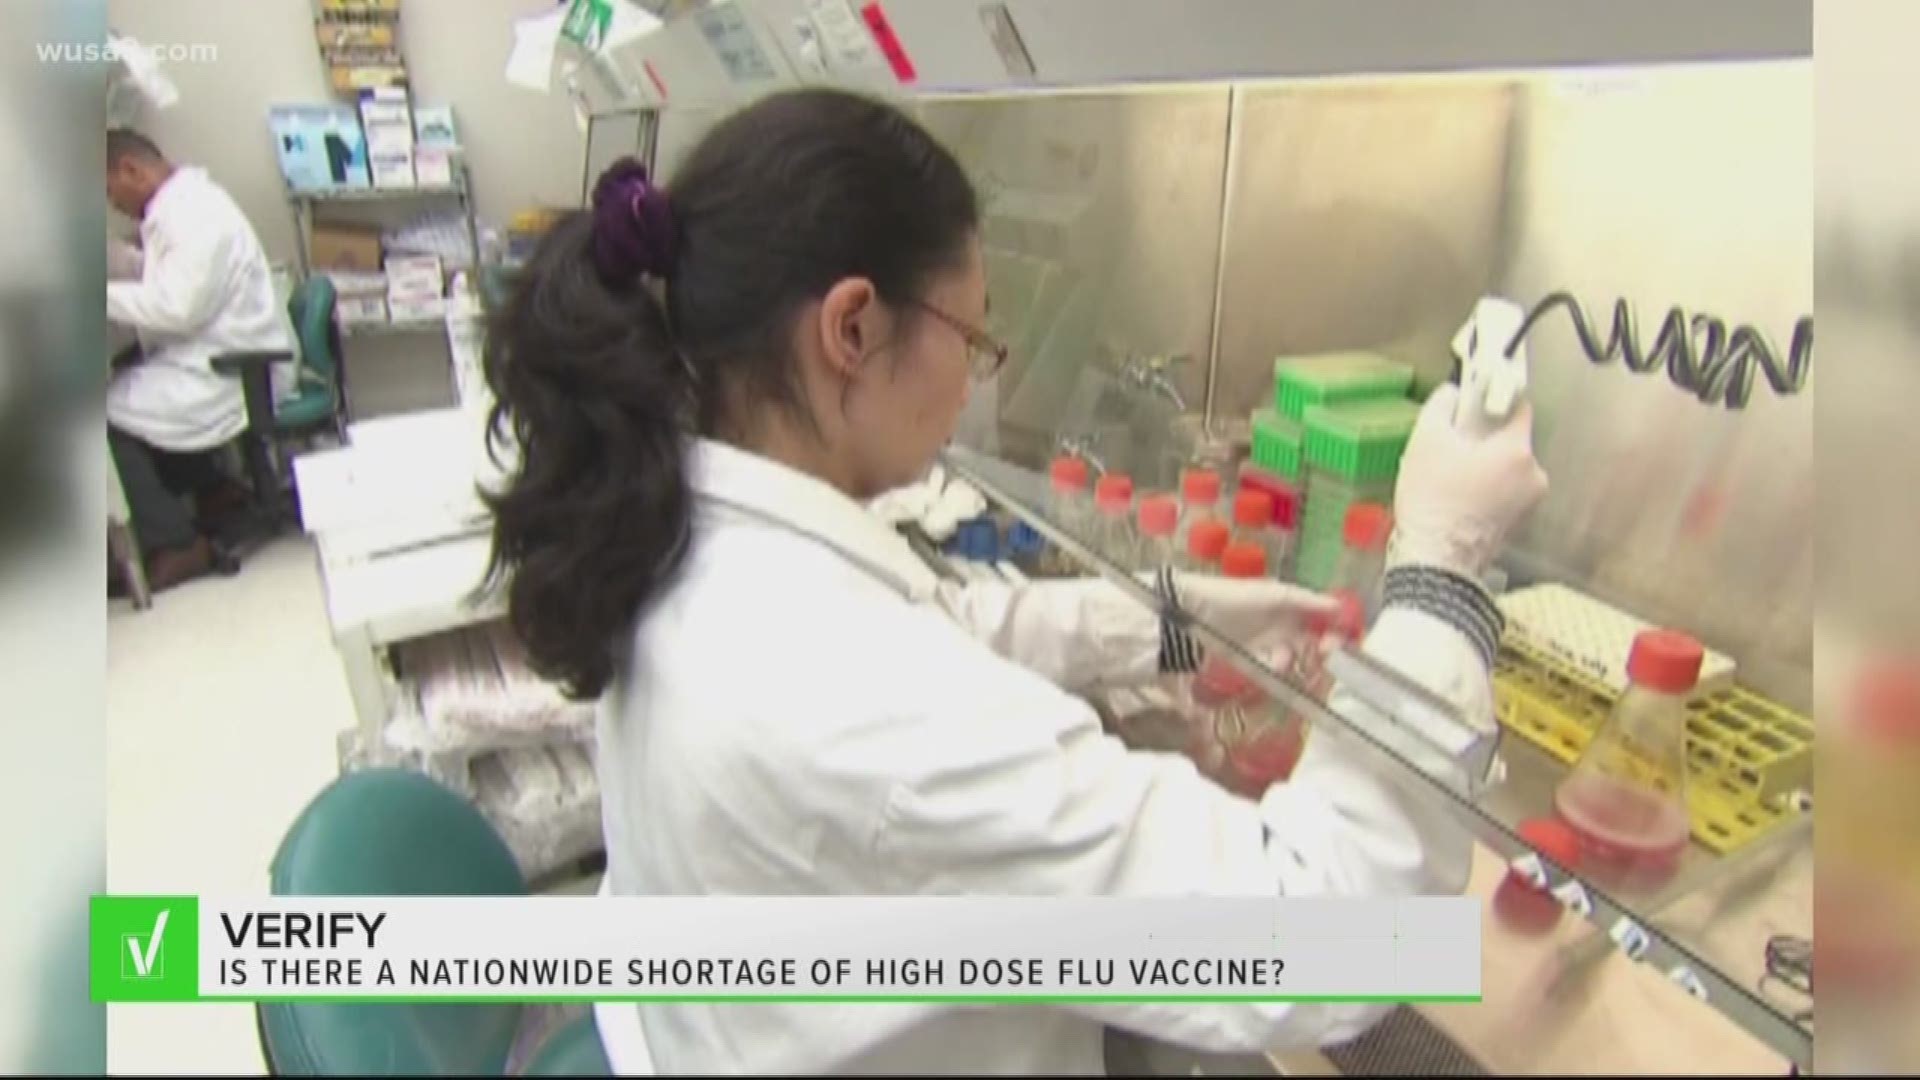 A viewer heard there was a shortage of the high-dose flu vaccine and asked the Verify team to find out if this is true or not.